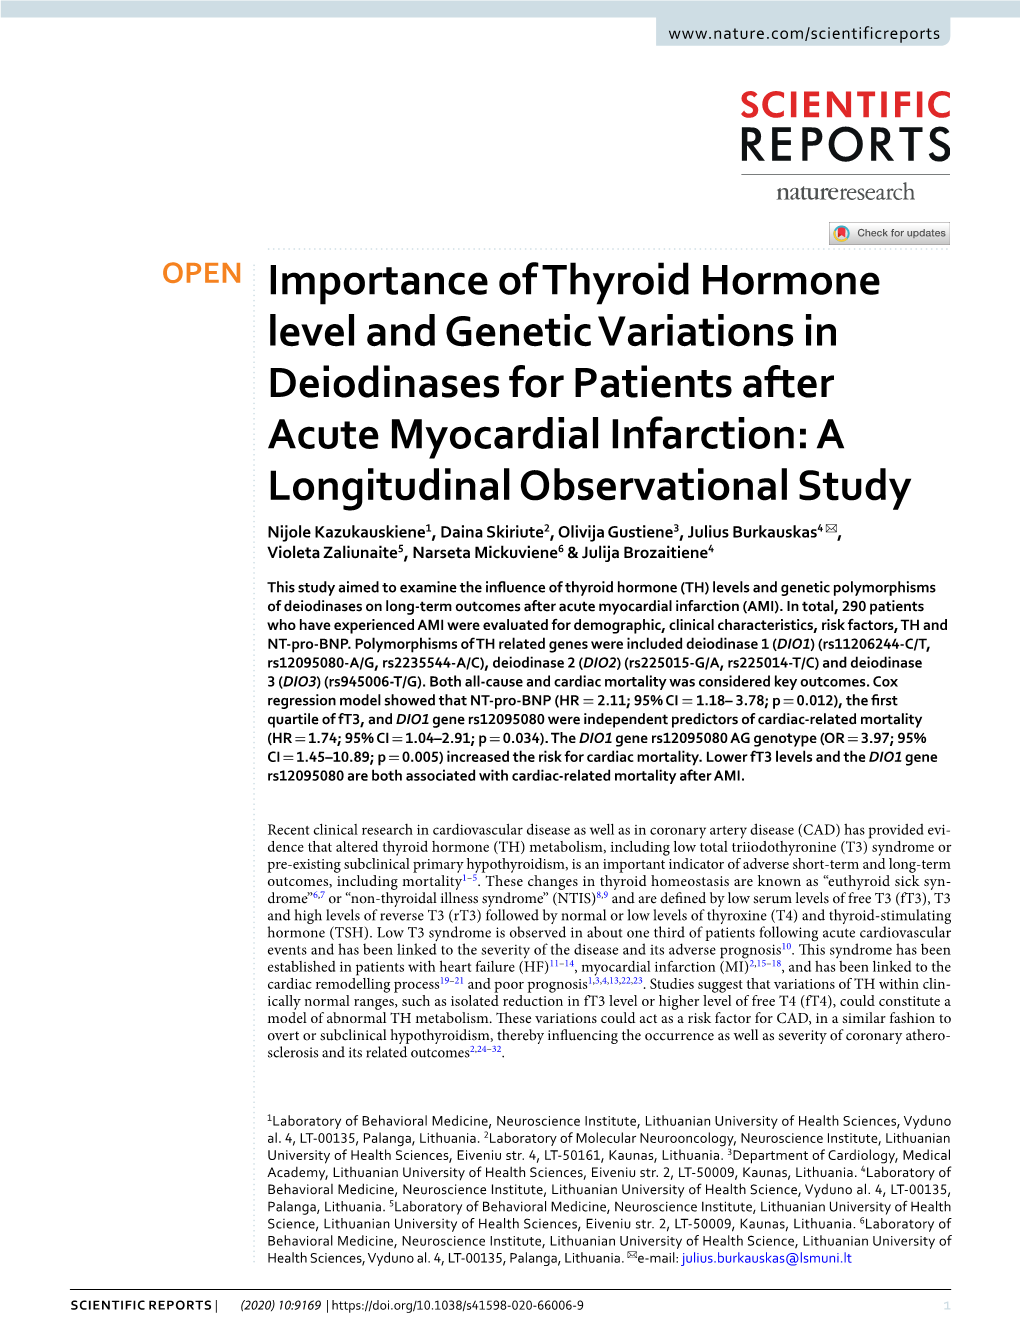 Importance of Thyroid Hormone Level and Genetic